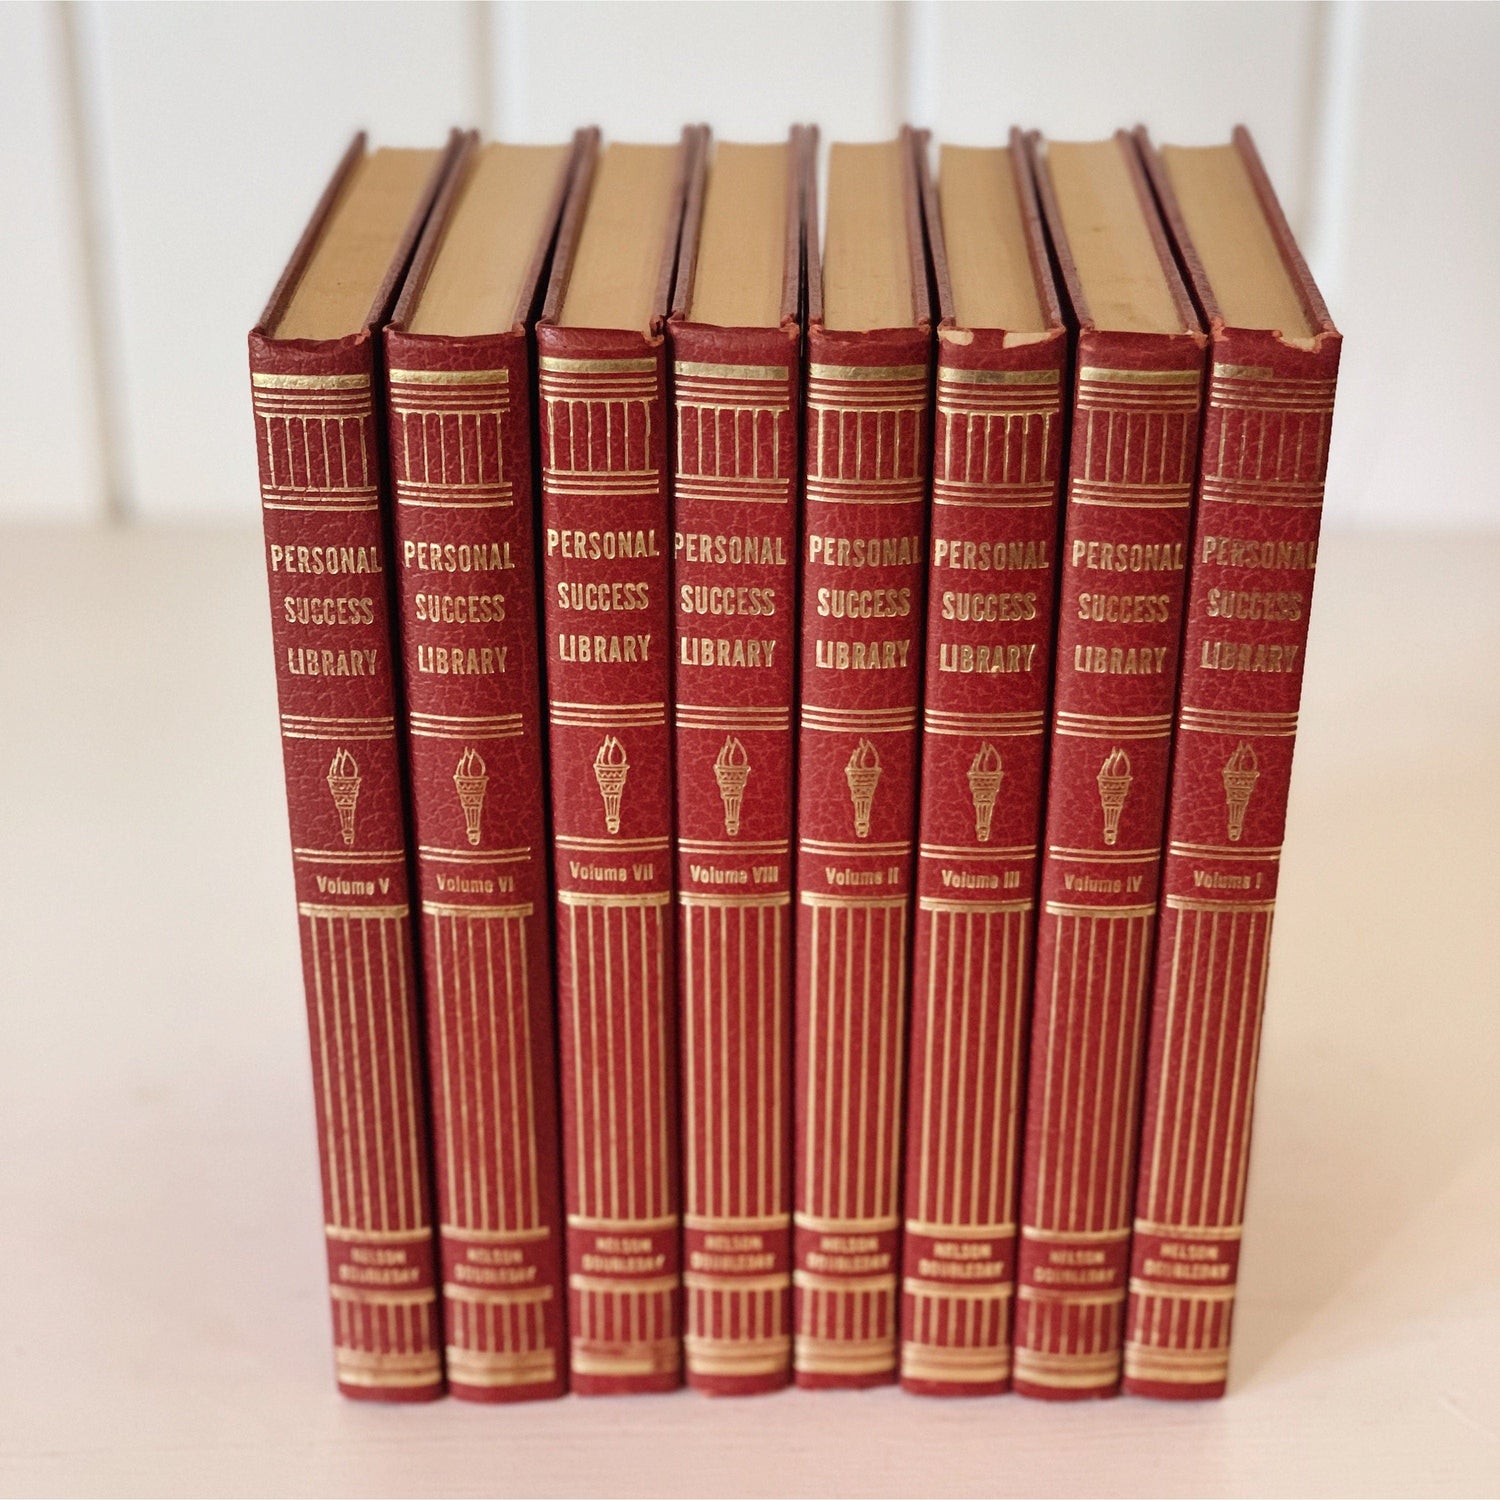 Personal Success Library Vintage Red and Gold Book Set, 1965